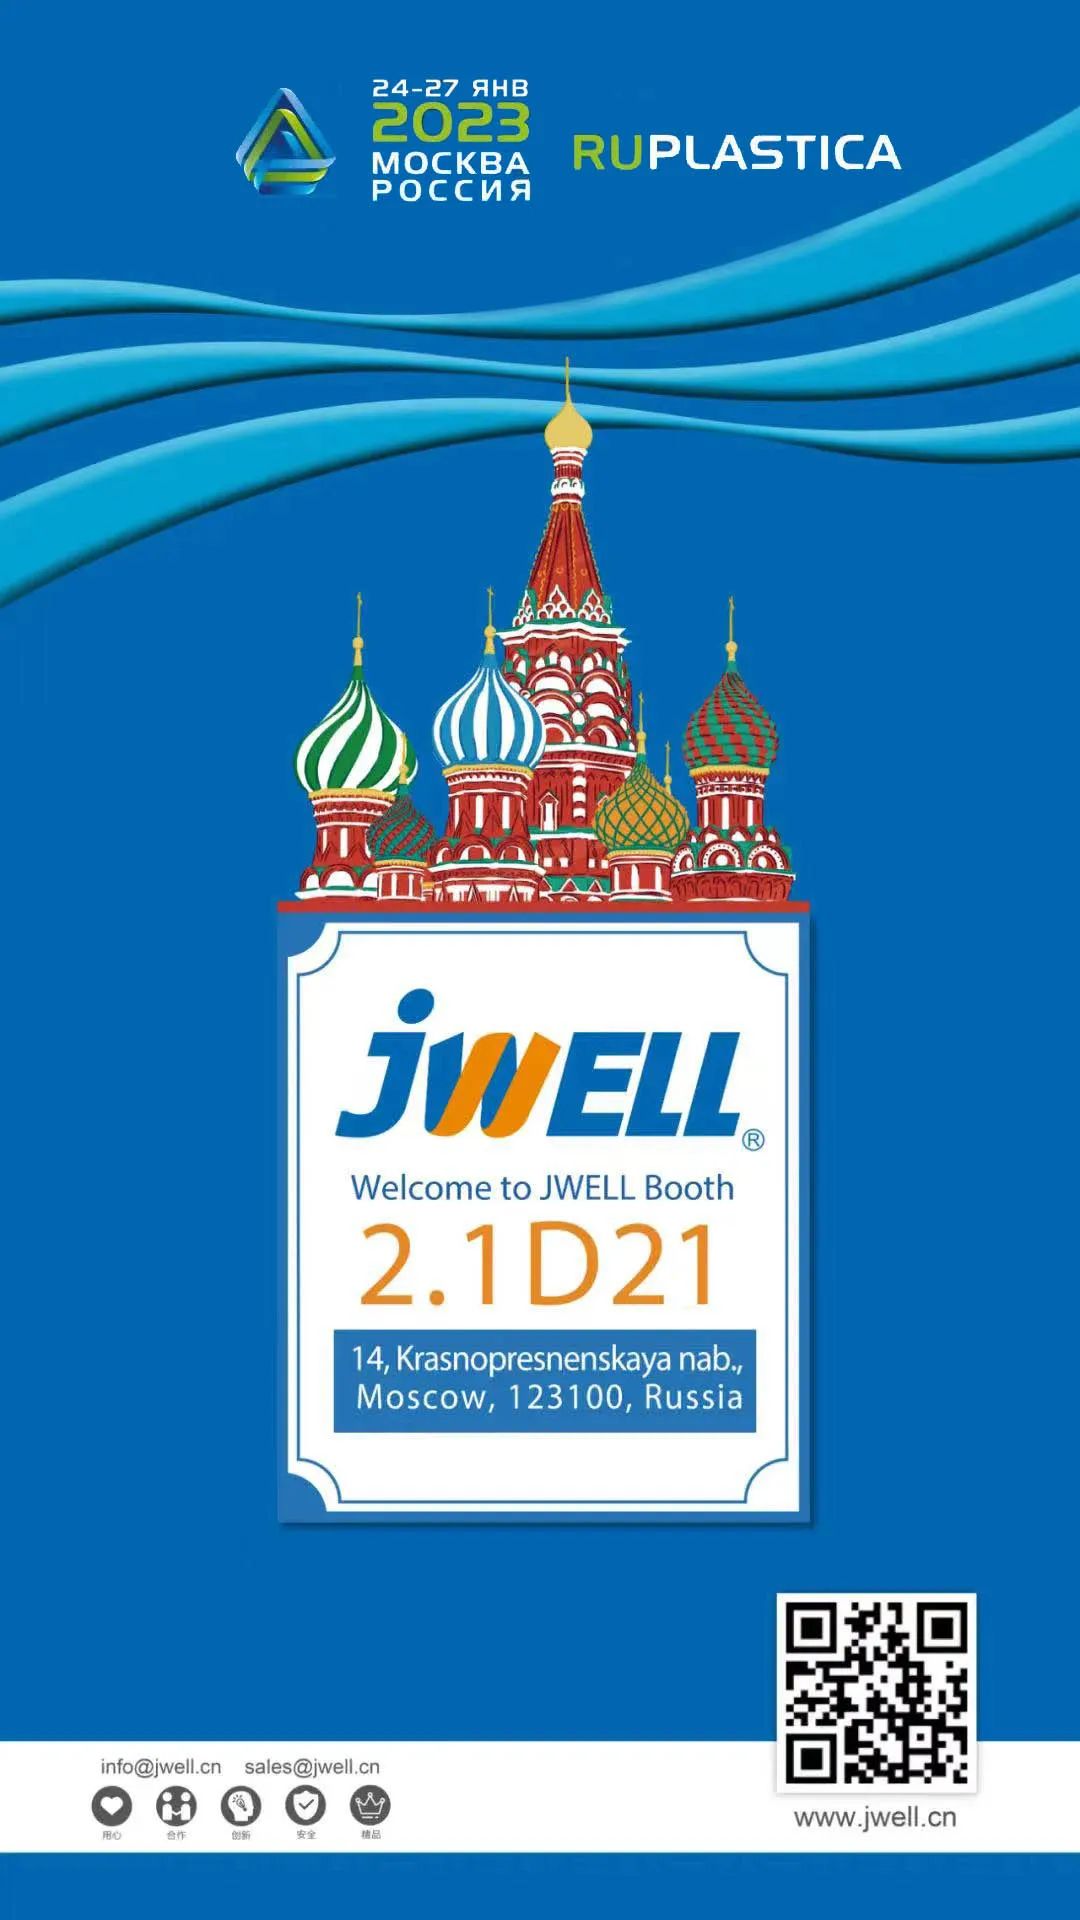 JWELL Machinery makes an appointment with you at RUPLASTICA 2023